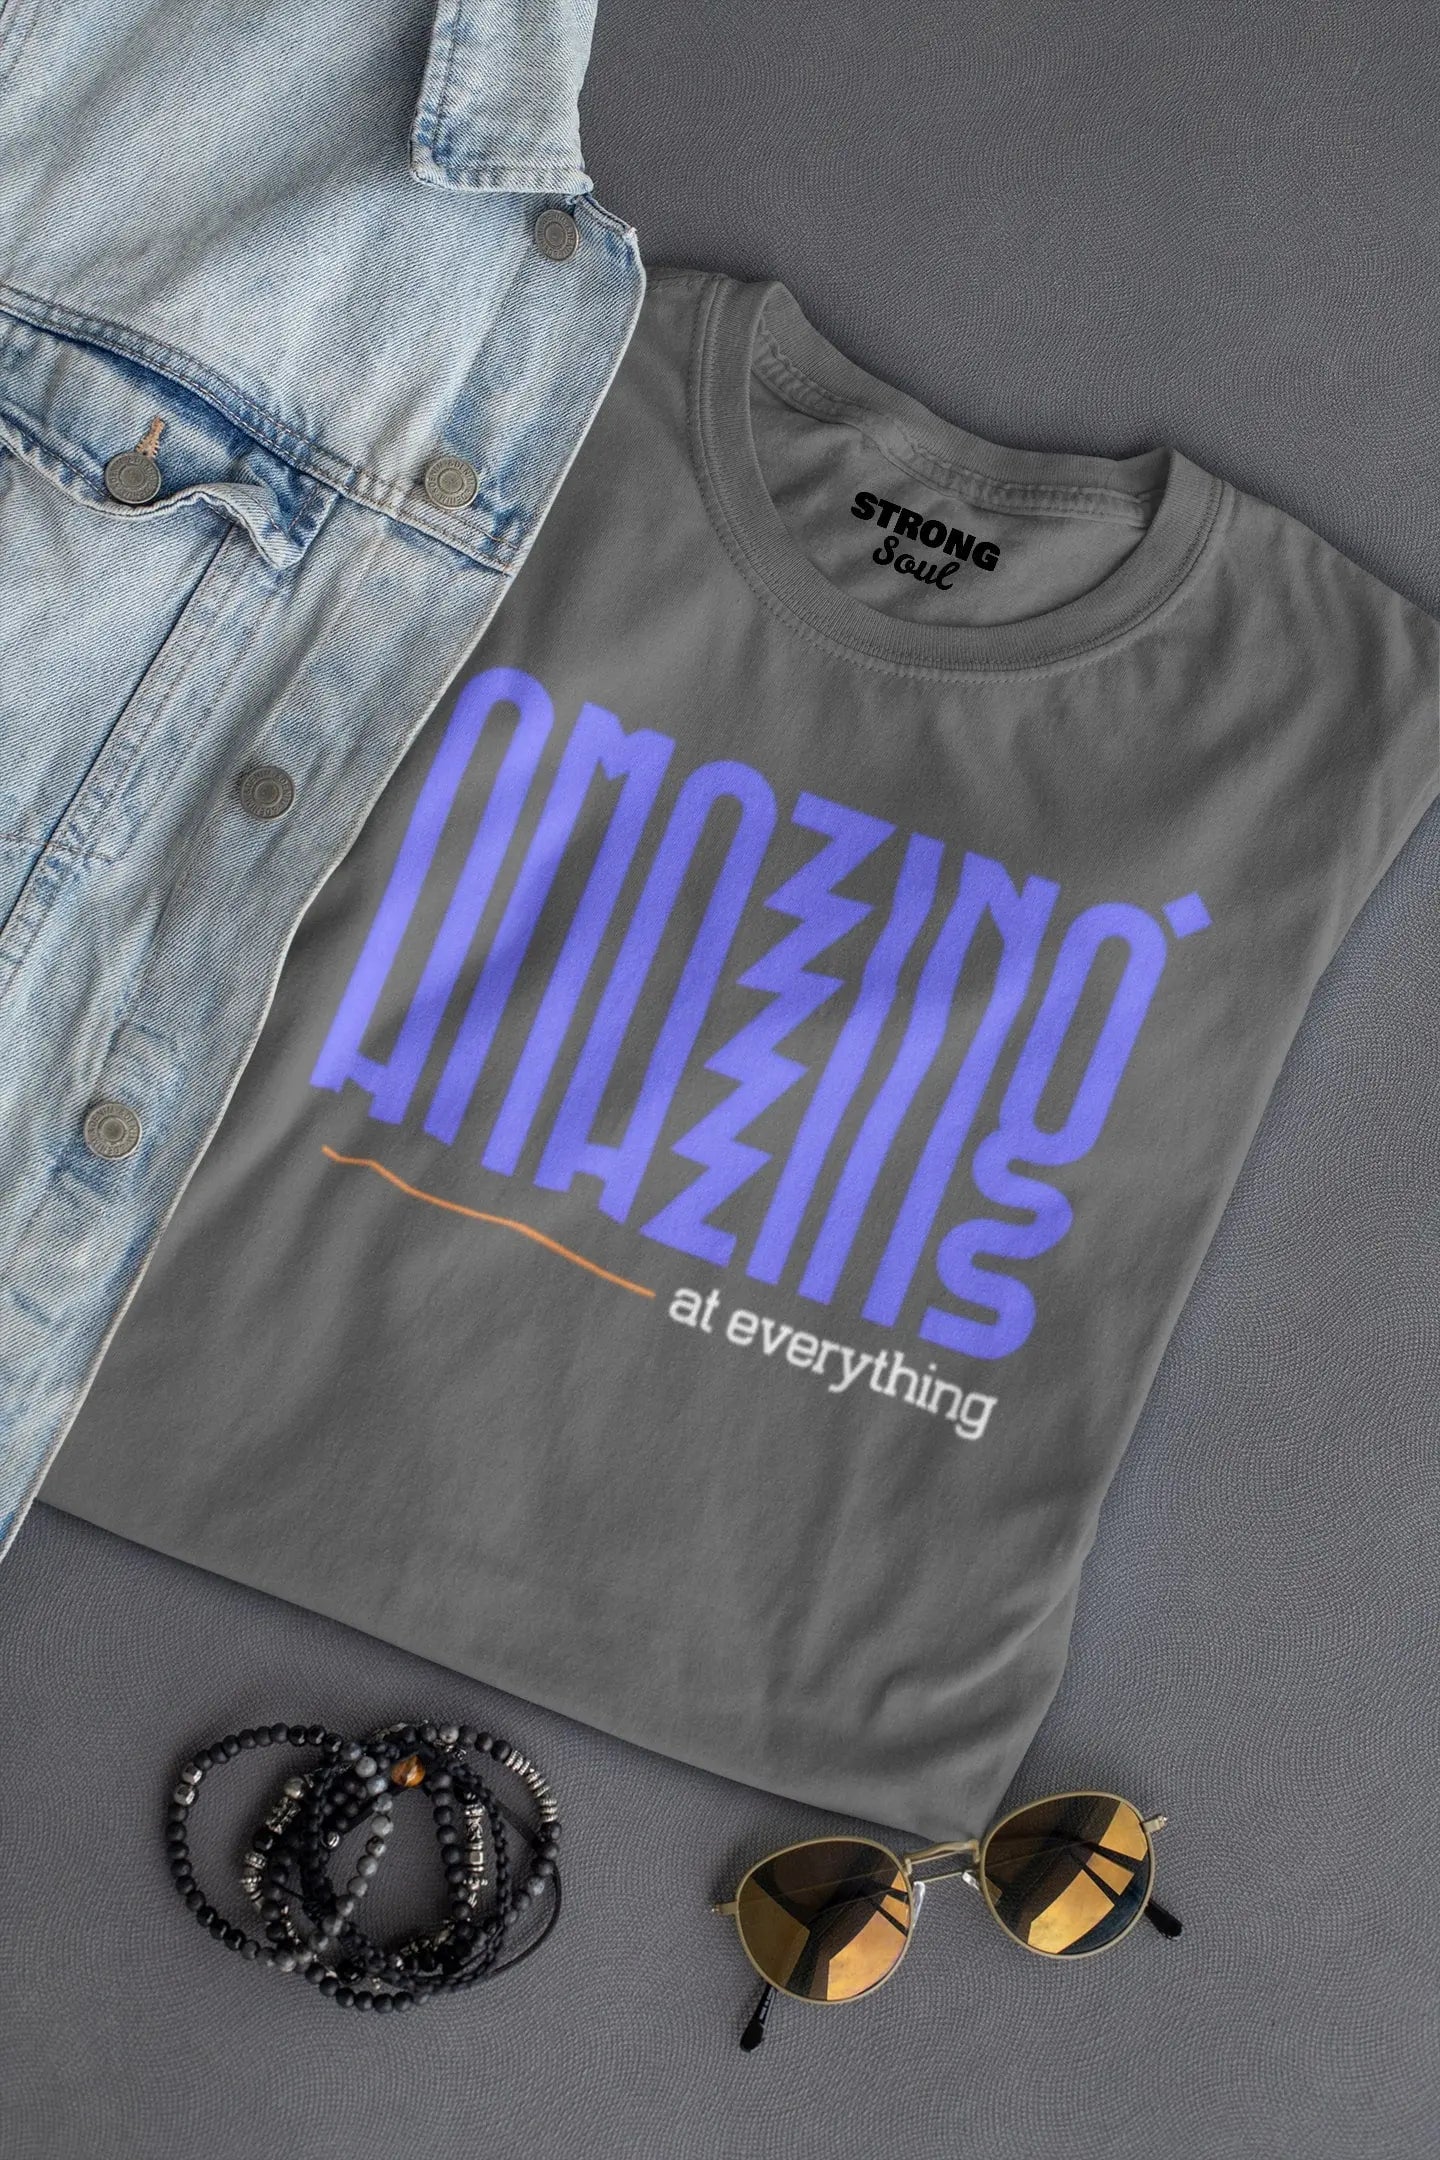 Amazing At Everything Strong Soul Shirts & Tops